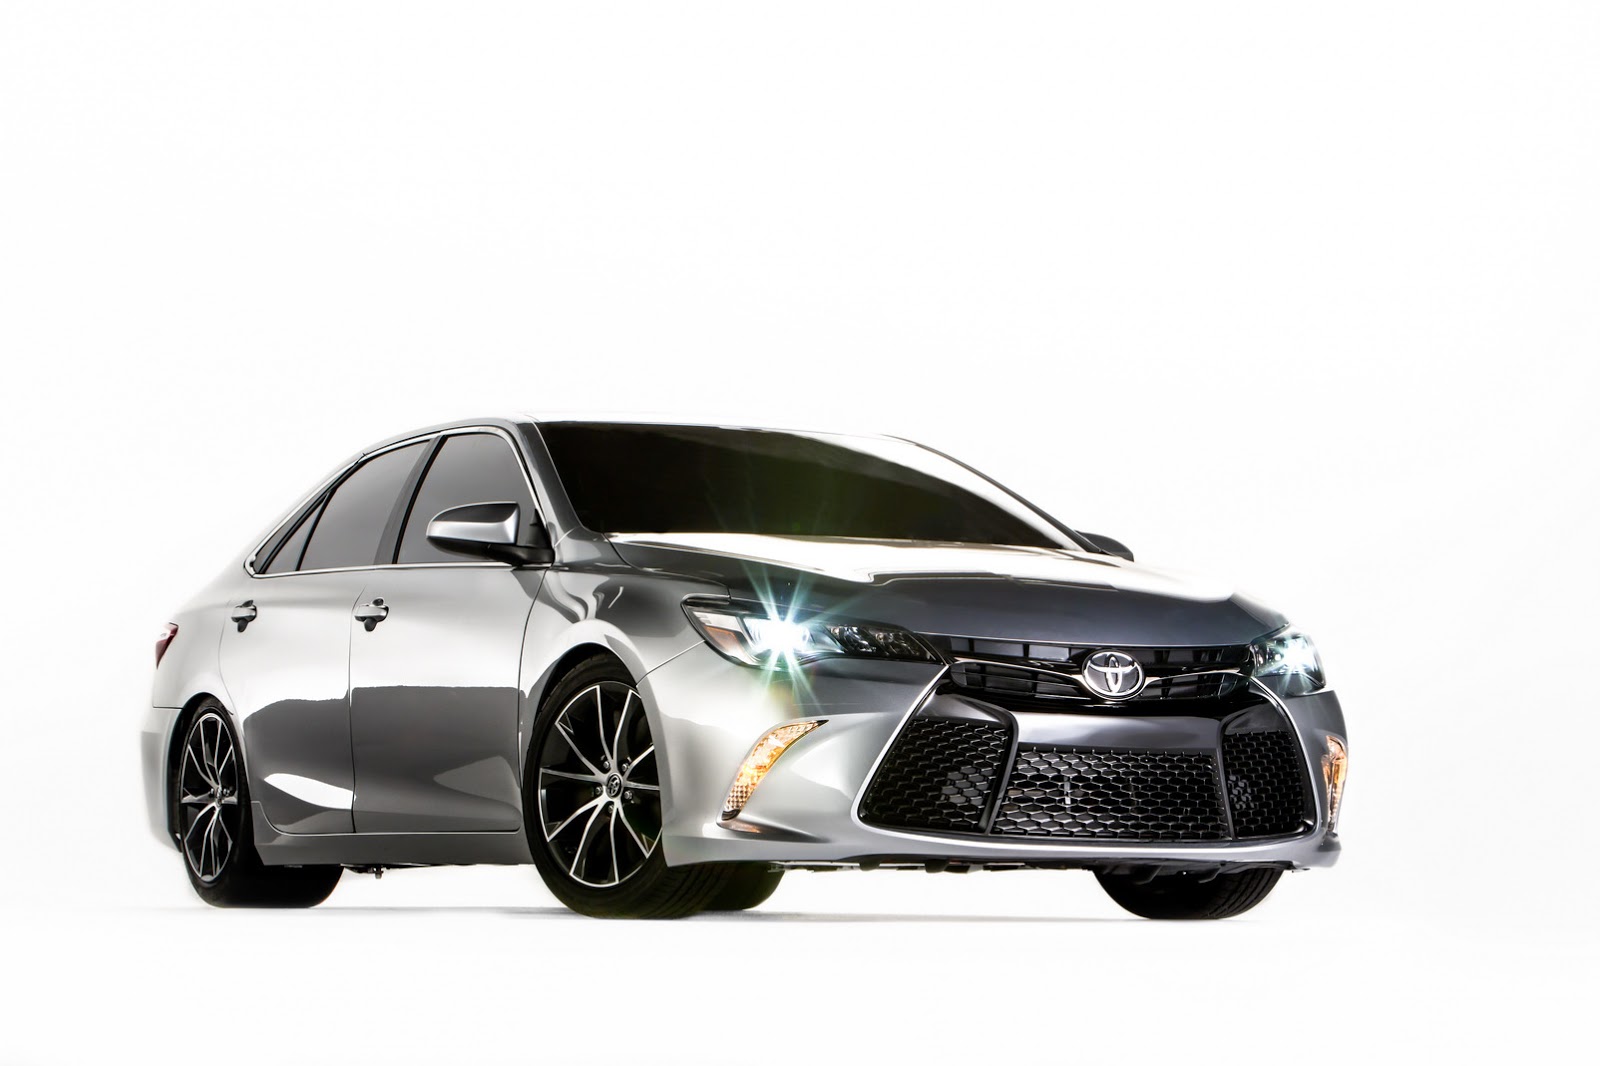 Toyota Just Figured Out How To Build A Proper Funny Car Out Of Their Camry-This Thing Is Killer!